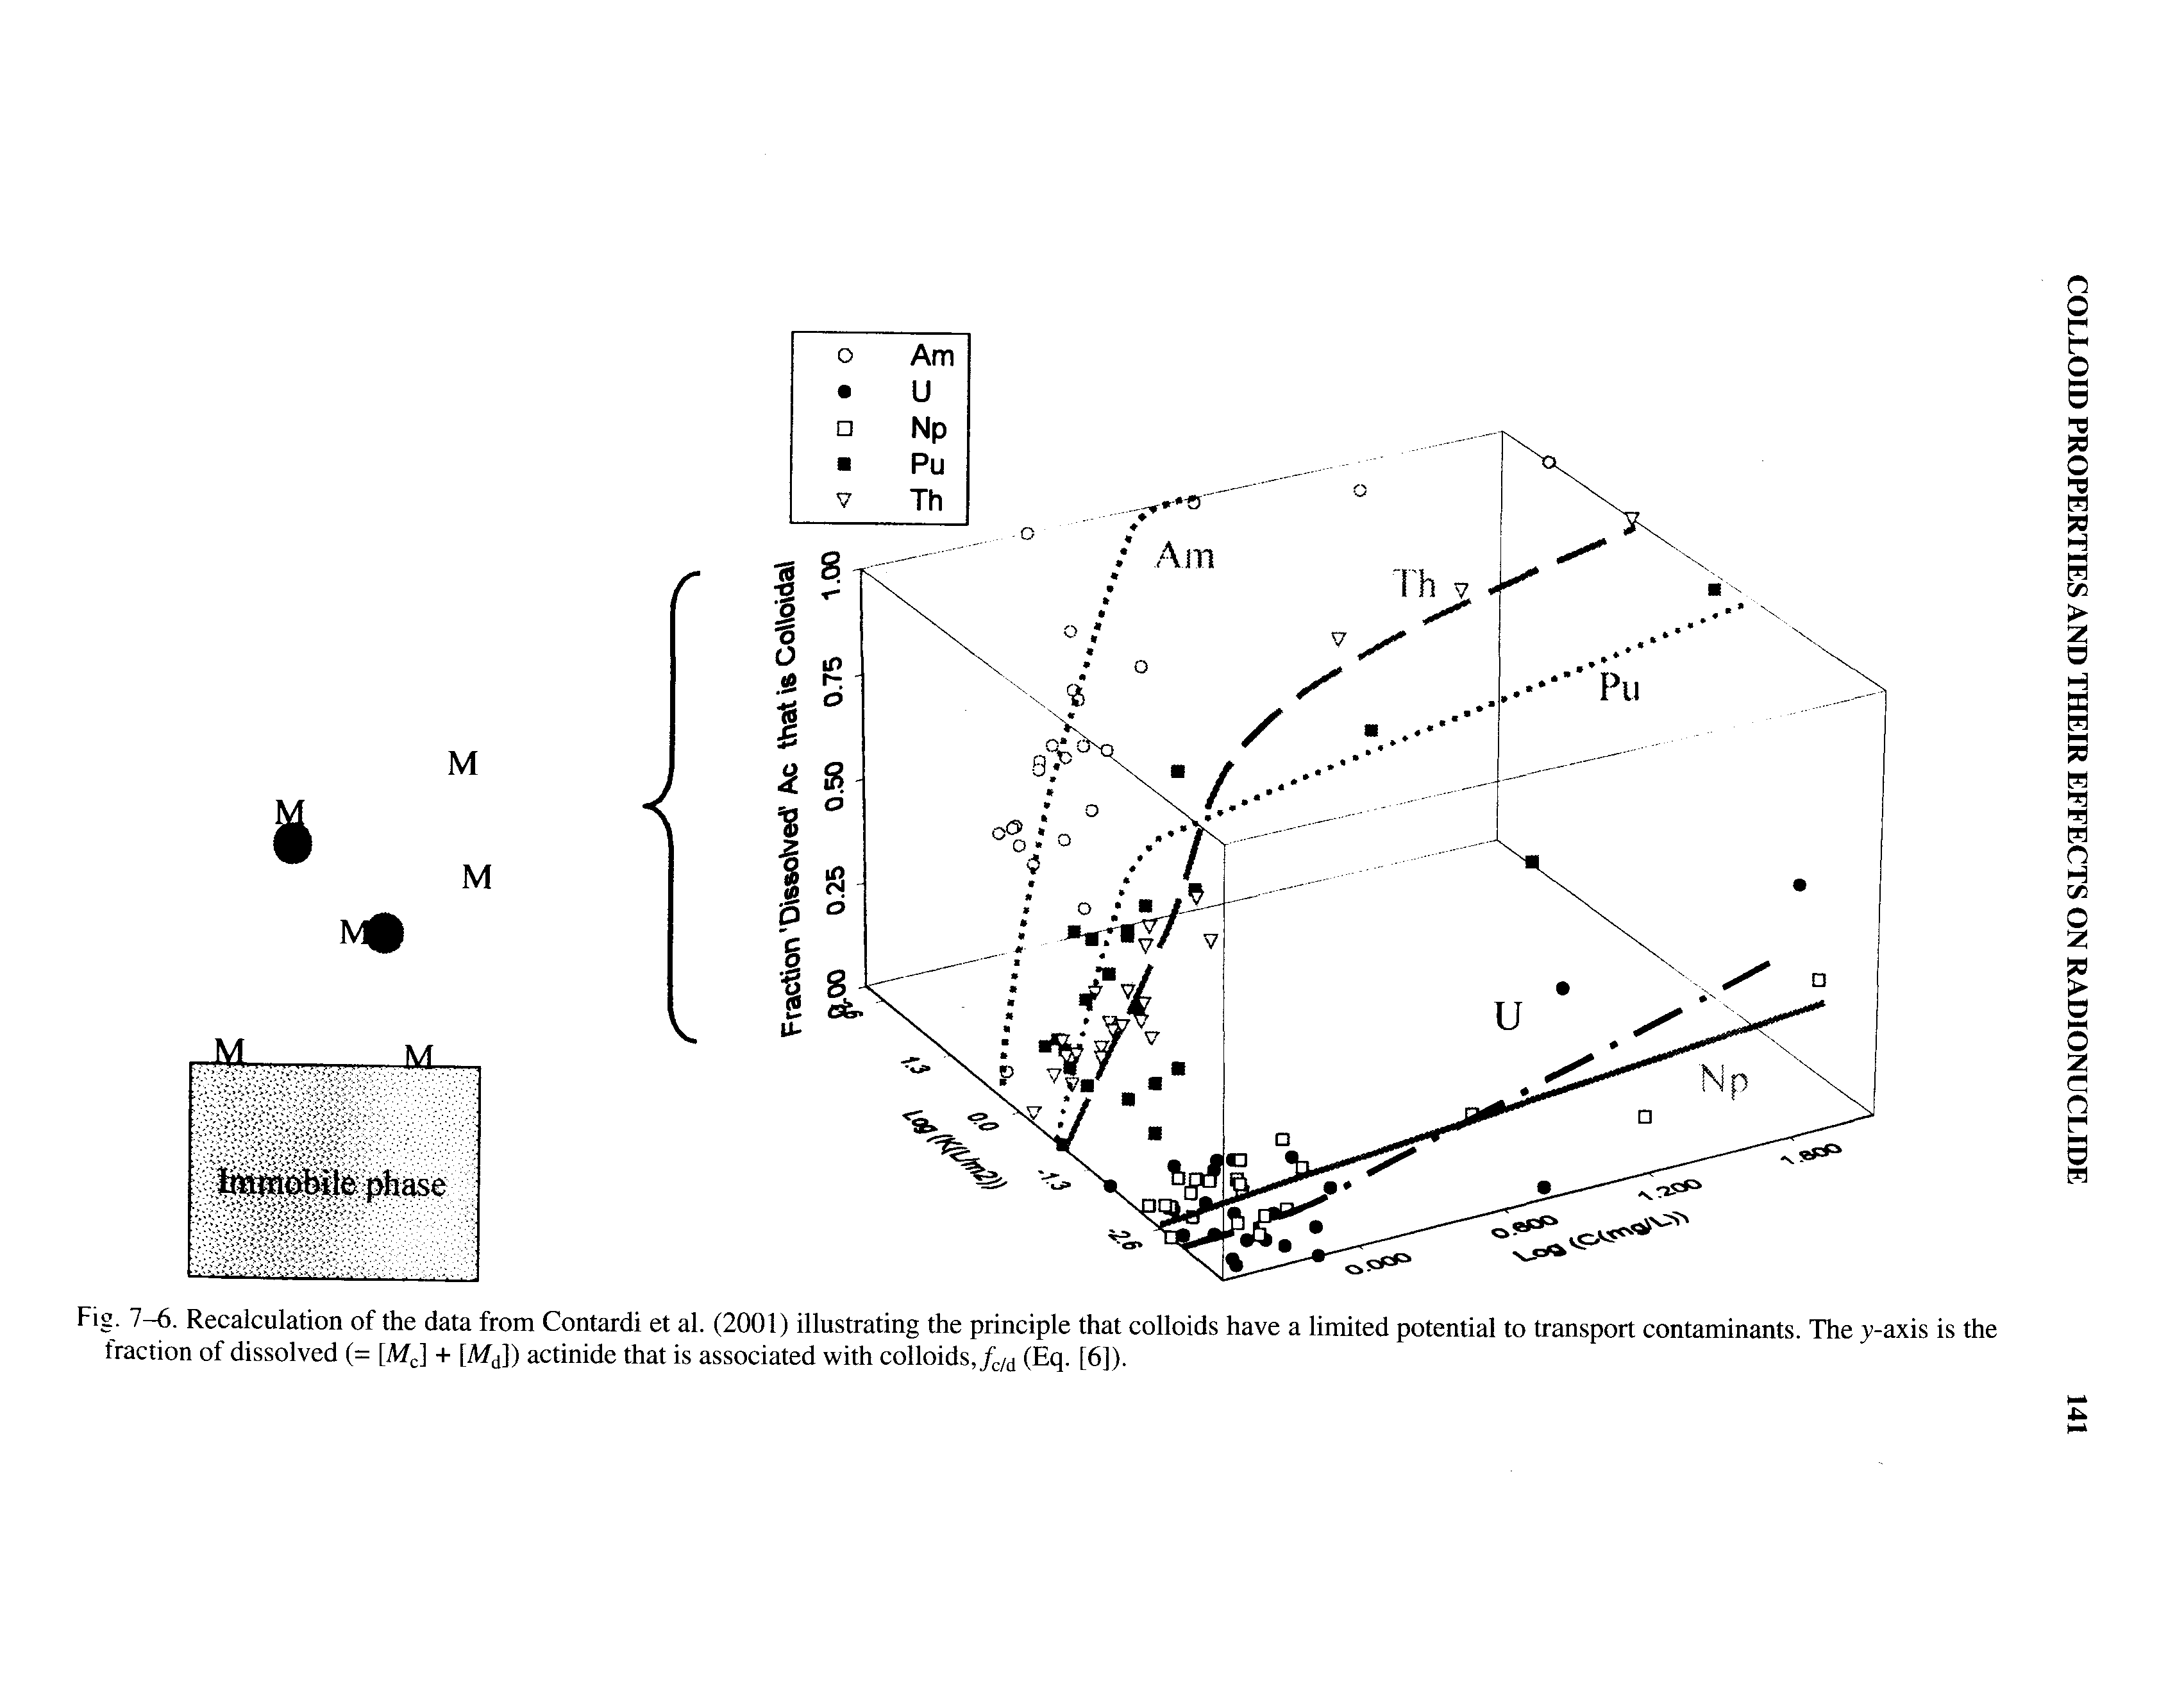 Fig. 7-6. Recalculation of the data from Contardi et al. (2001) illustrating the principle that colloids have a limited potential to transport contaminants. The j-axis is the fraction of dissolved (= [MJ + M ) actinide that is associated with colloids,/ /d (Eq. [6]).